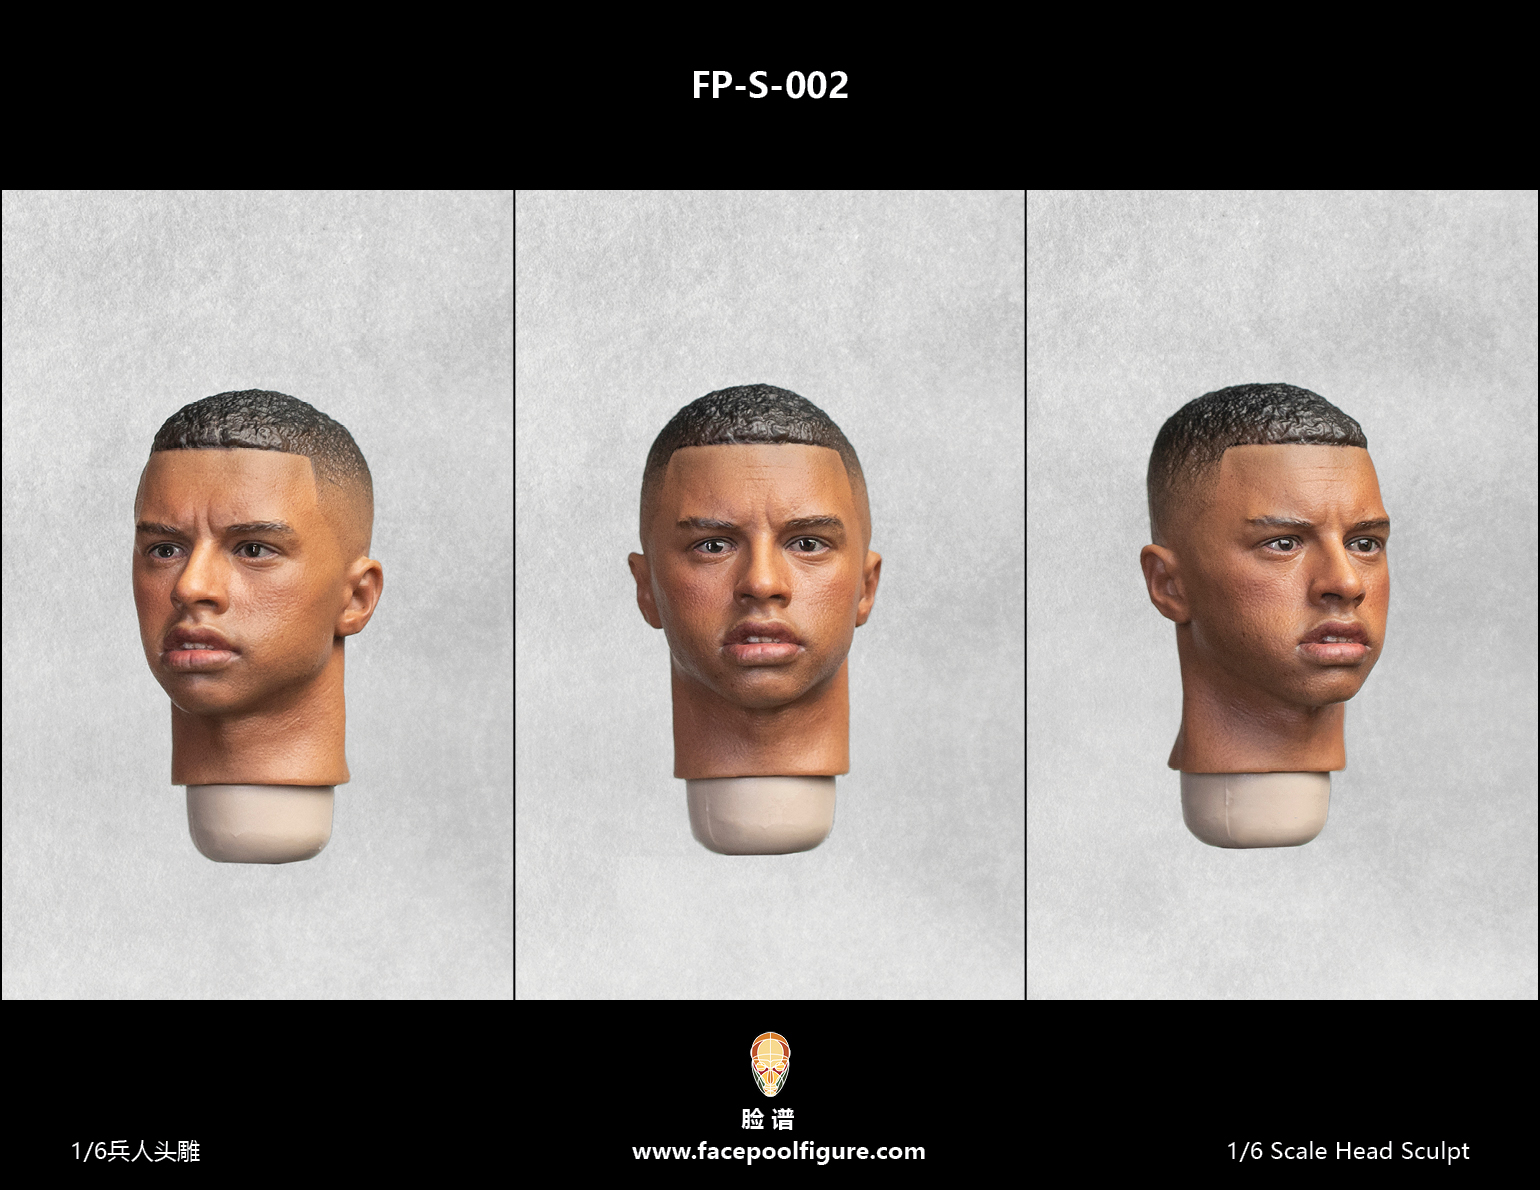 FacepoolFigure 1/6 Black Male Sculpt Store FP-S-002 Online Facepoolfigure Head Expression – with